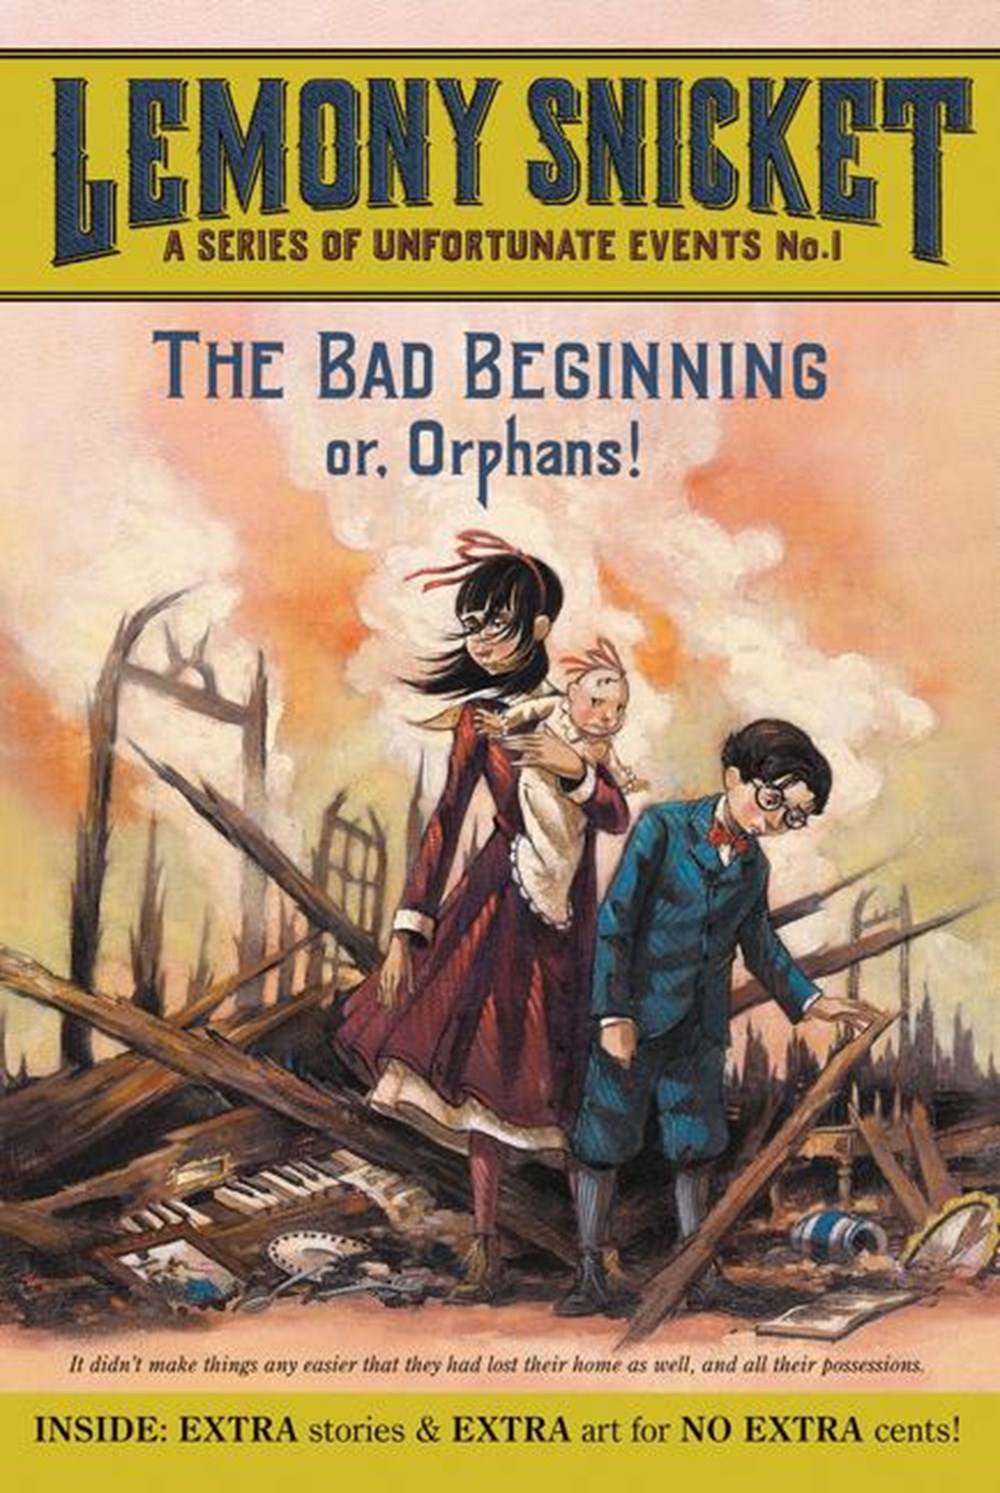 Series of Unfortunate Events #1: The Bad Beginning